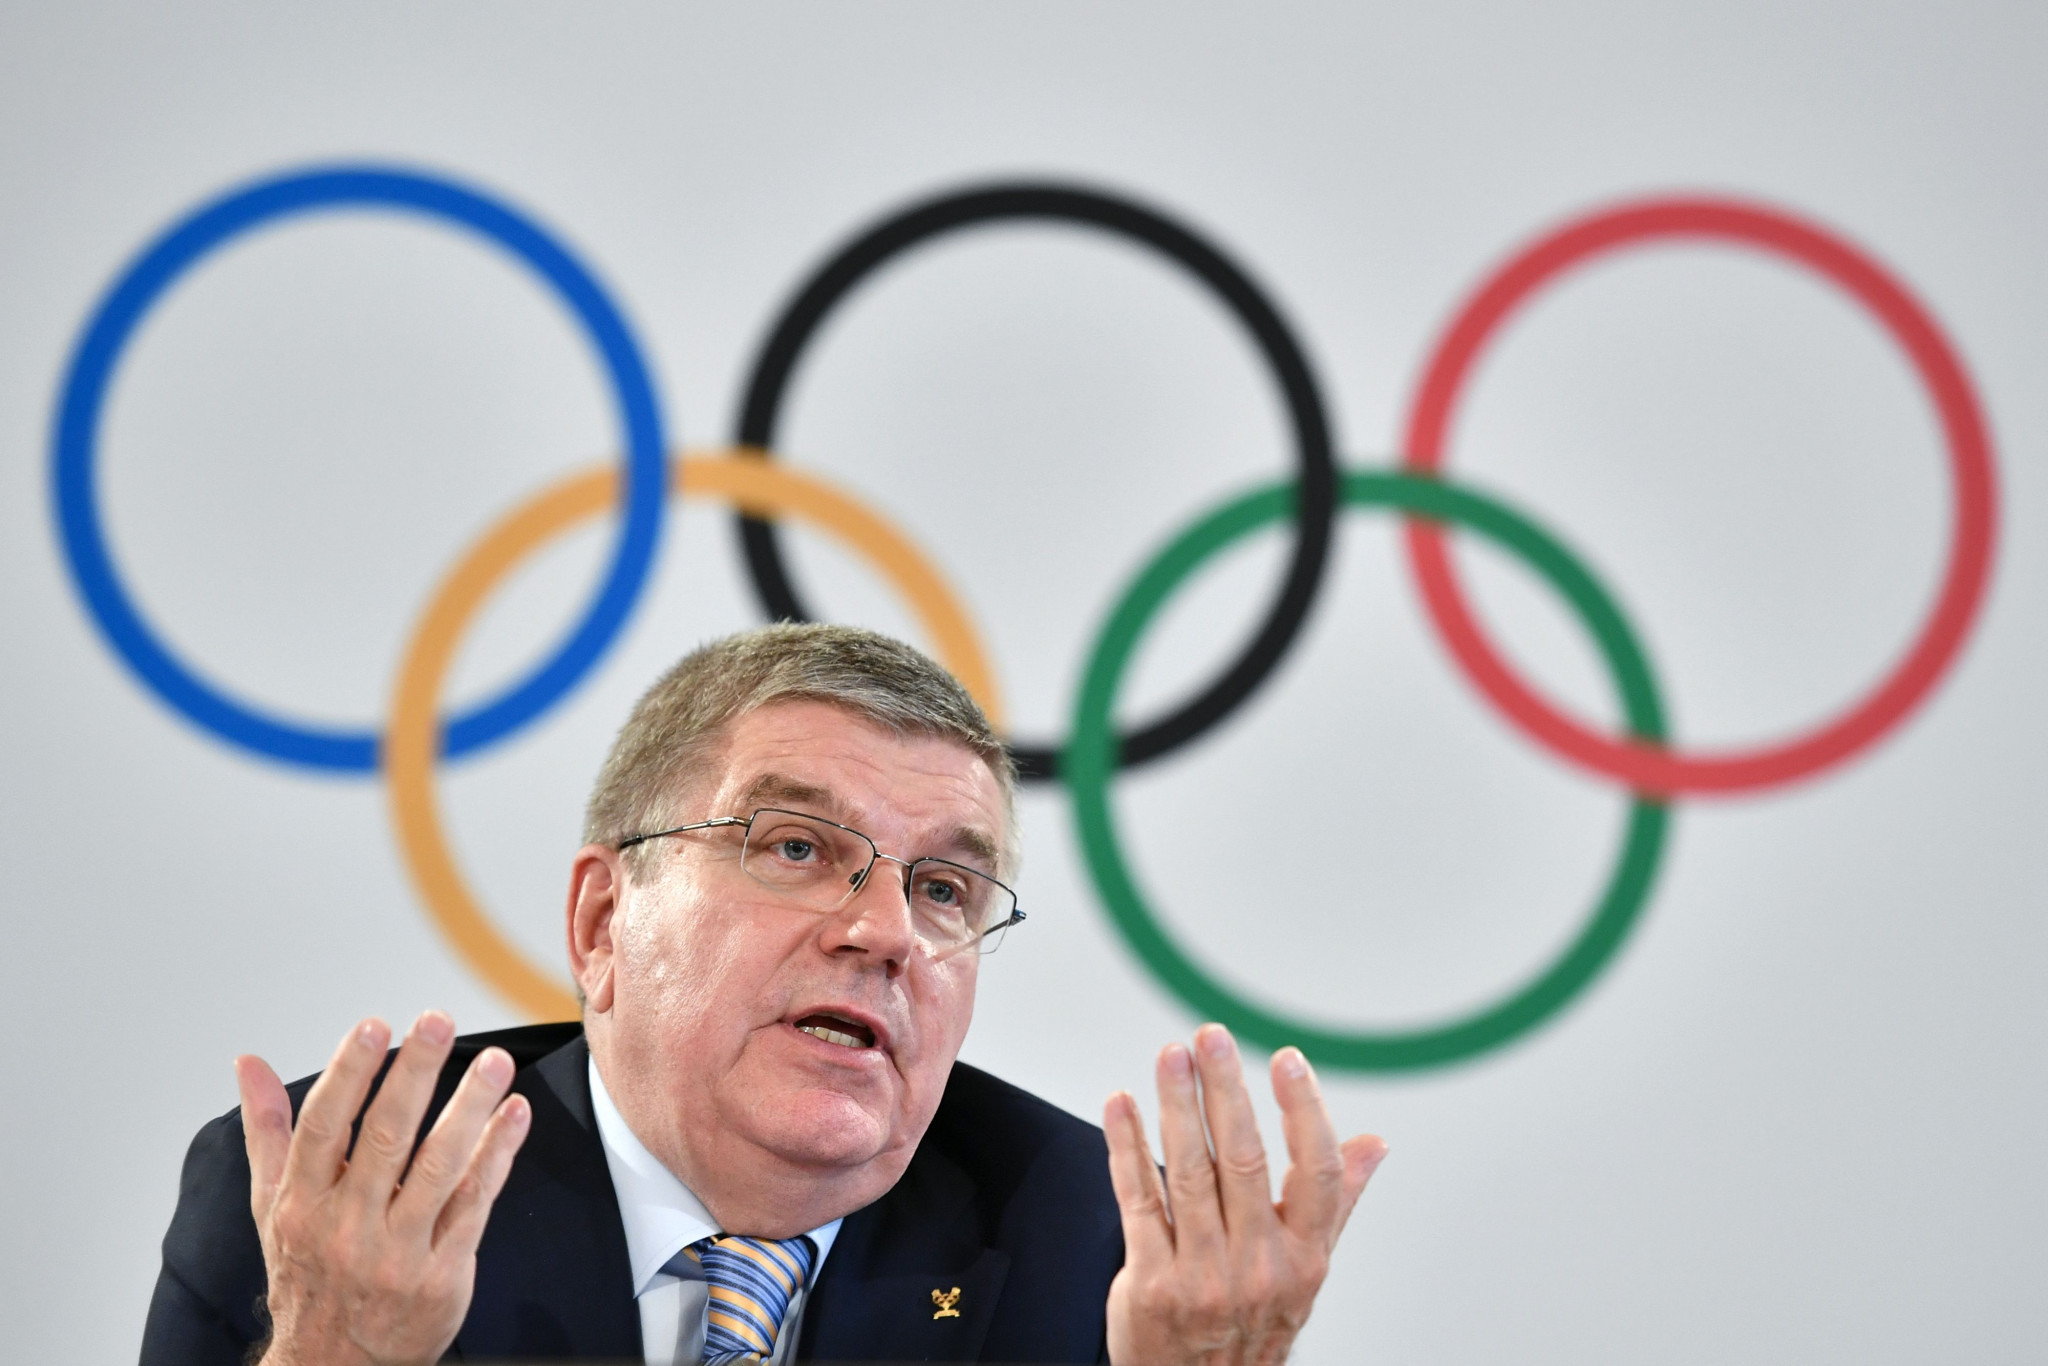 IOC President Thomas Bach has previously warned Gafur Rakhimov's election could lead to boxing losing its Olympic place ©Getty Images